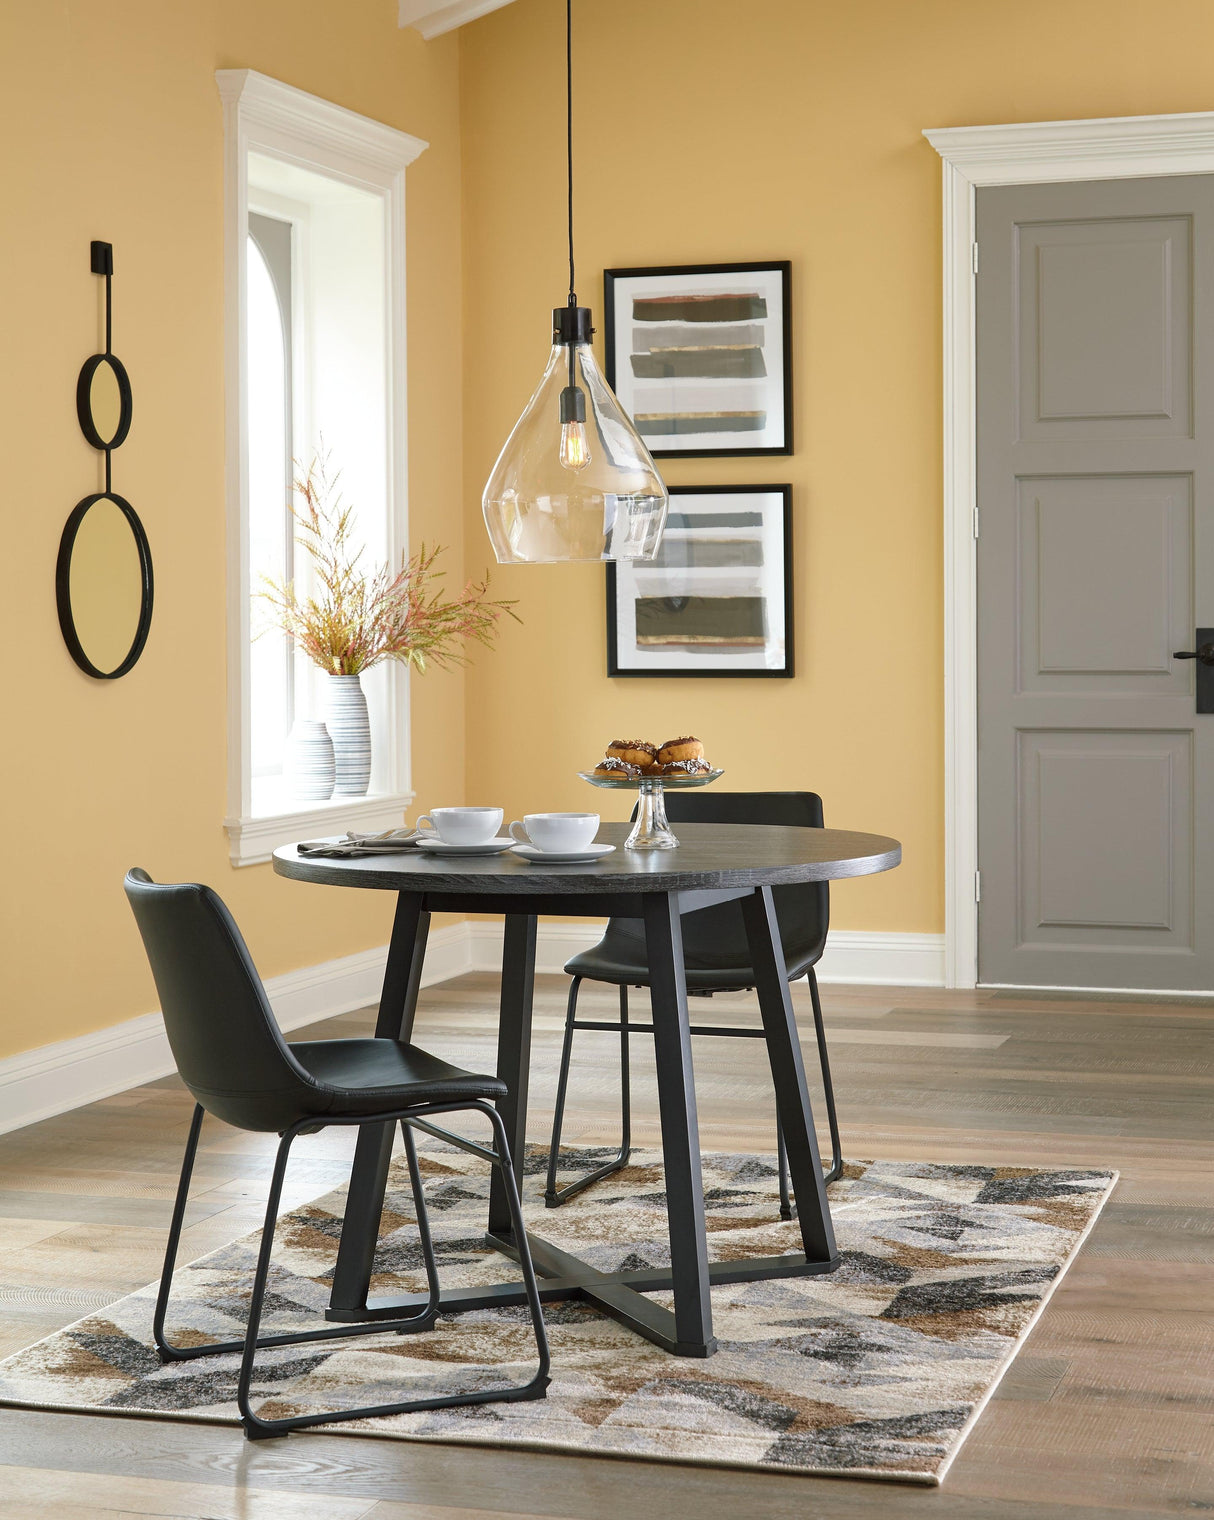 Centiar Black Dining Table And 2 Chairs - Ella Furniture